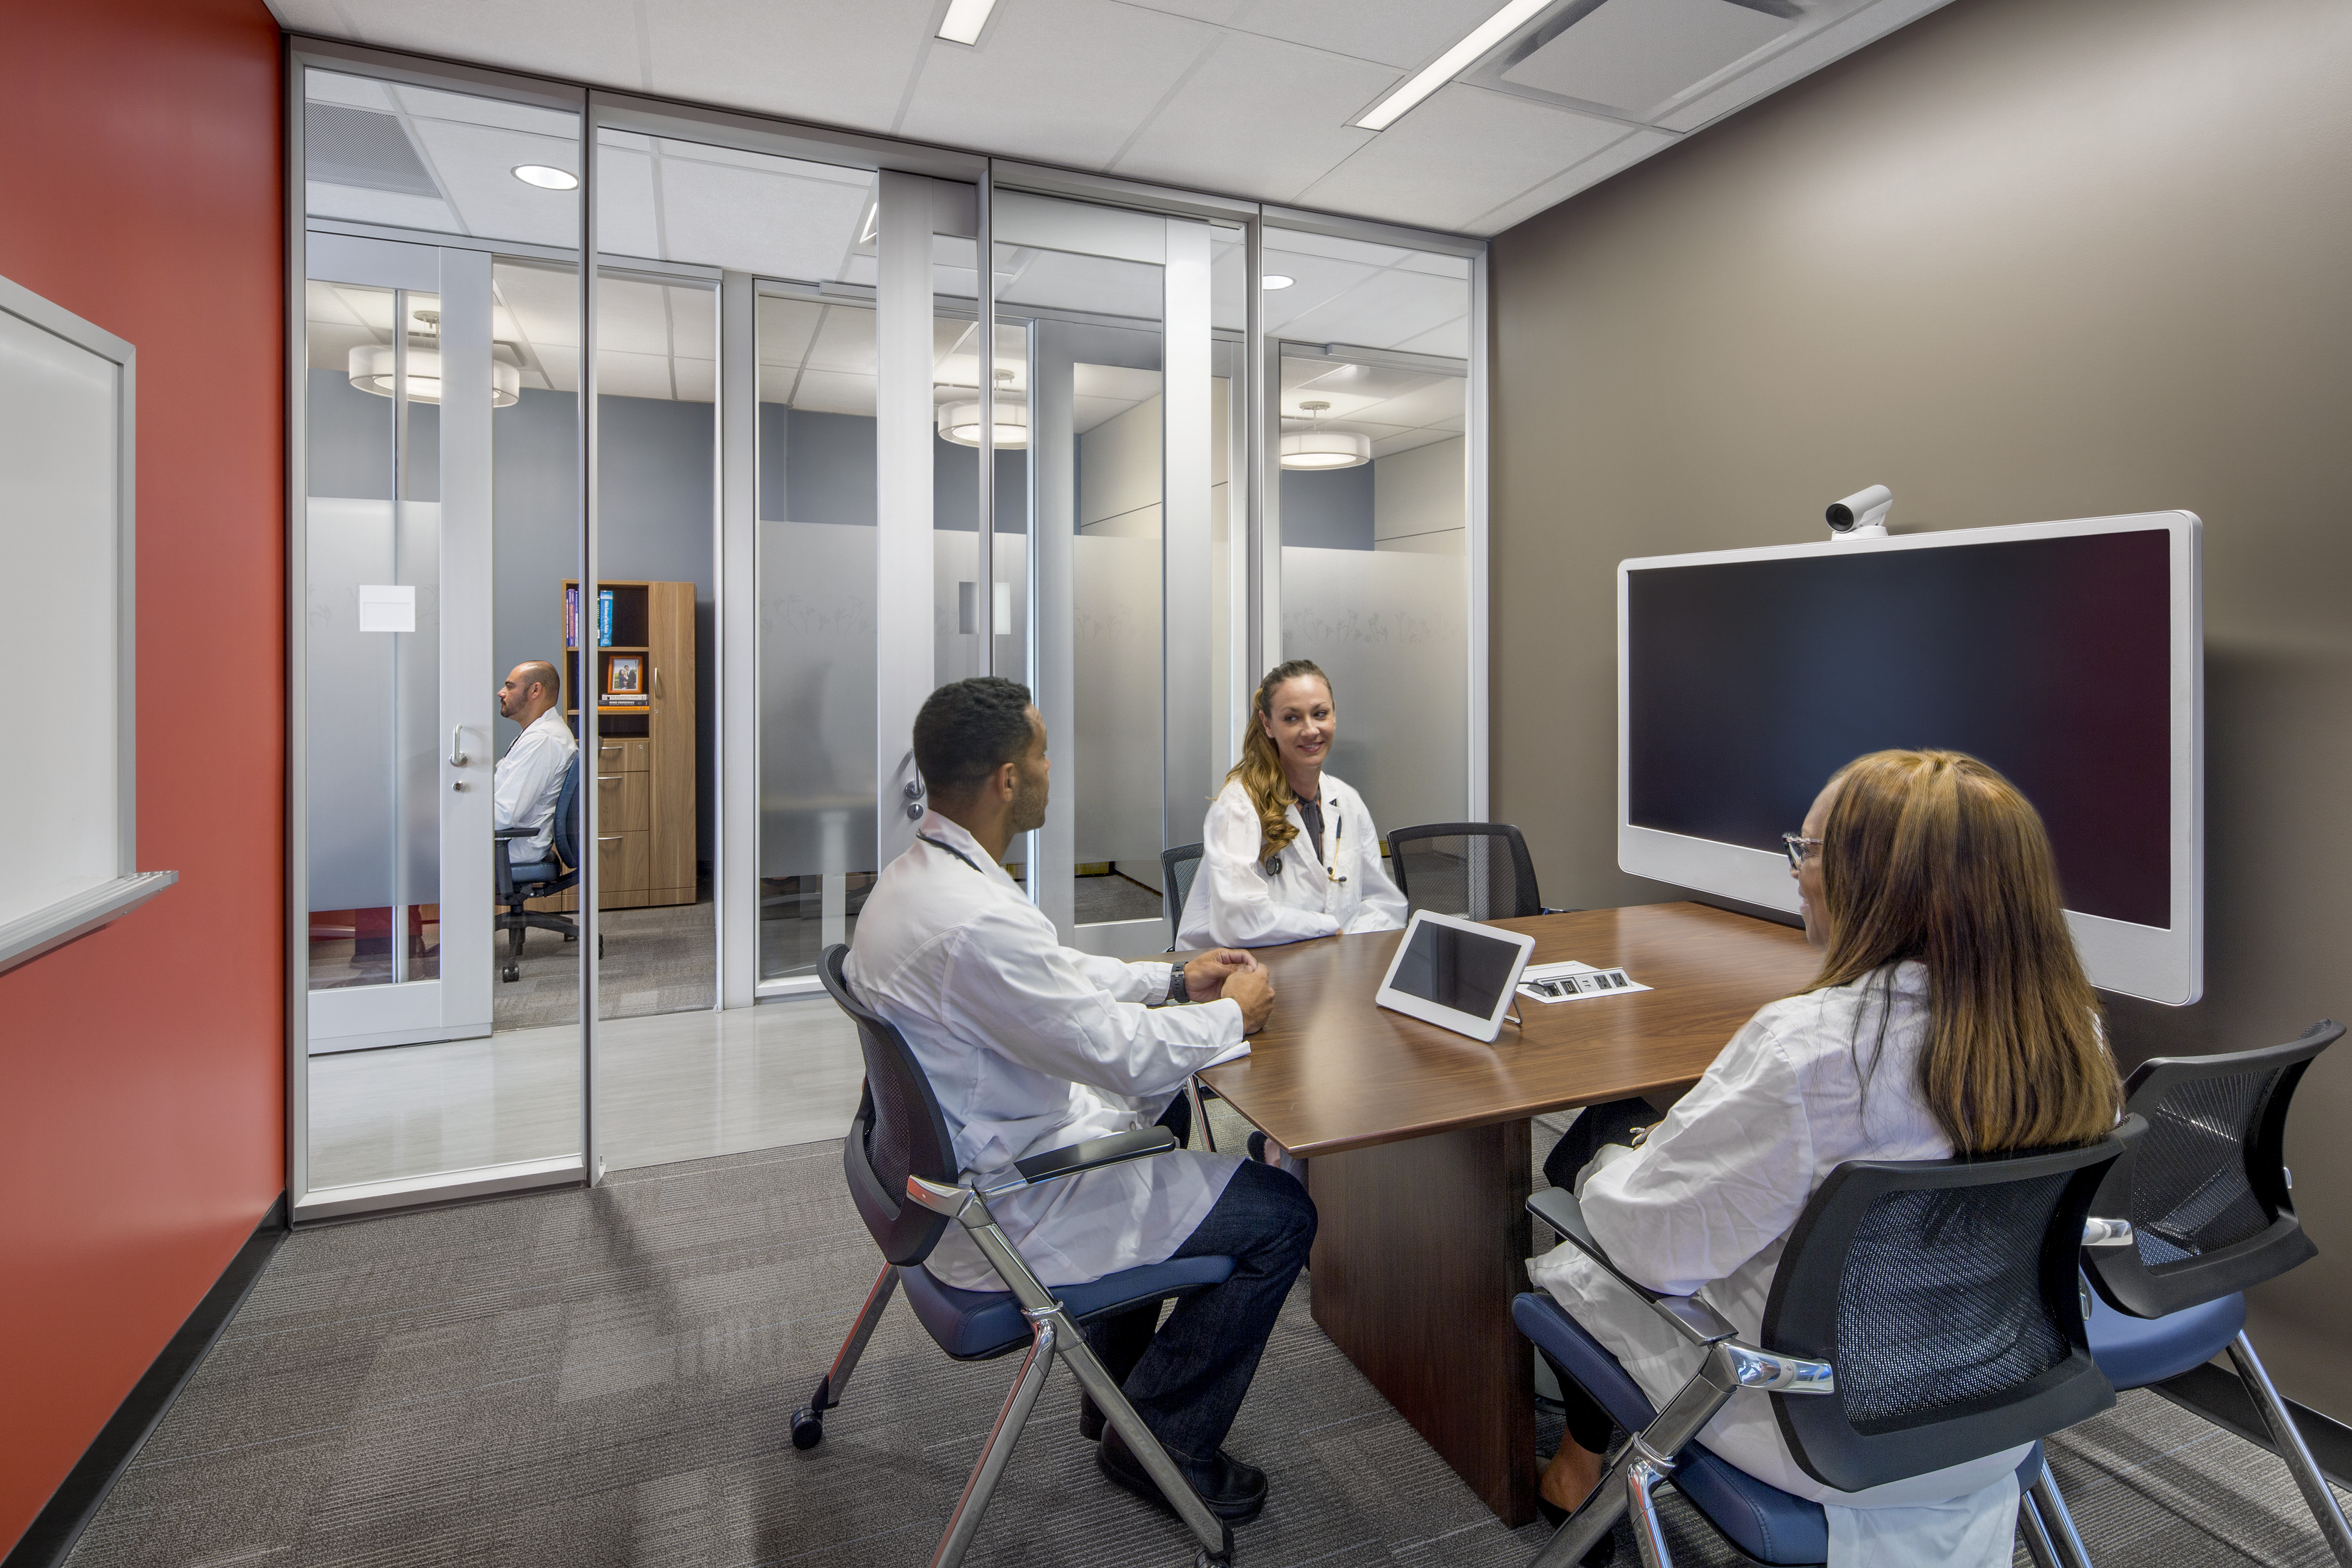 Video conference rooms are examples of all-inclusive design at Kaiser Permanente La Habra Hospital.